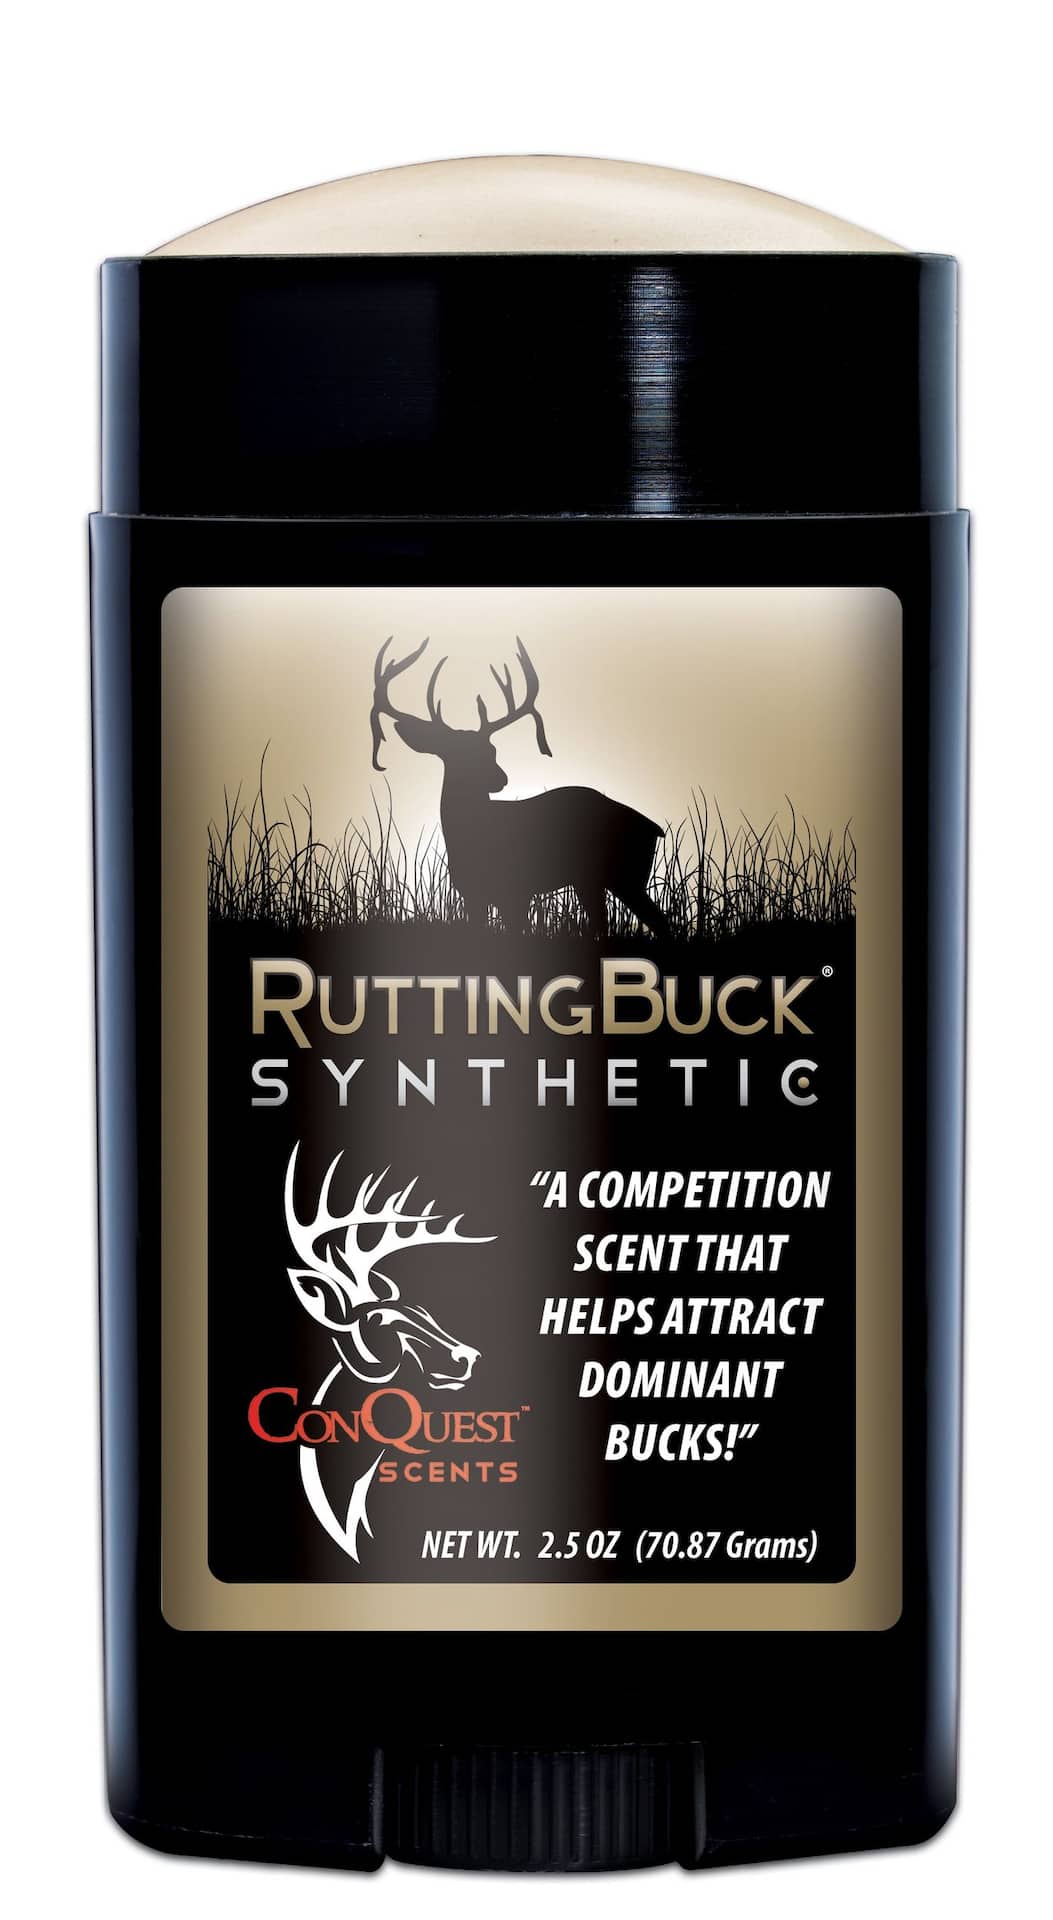 33 Point Buck Cover Scent and Deer Attractant - Vapor Trail Scents, 4oz